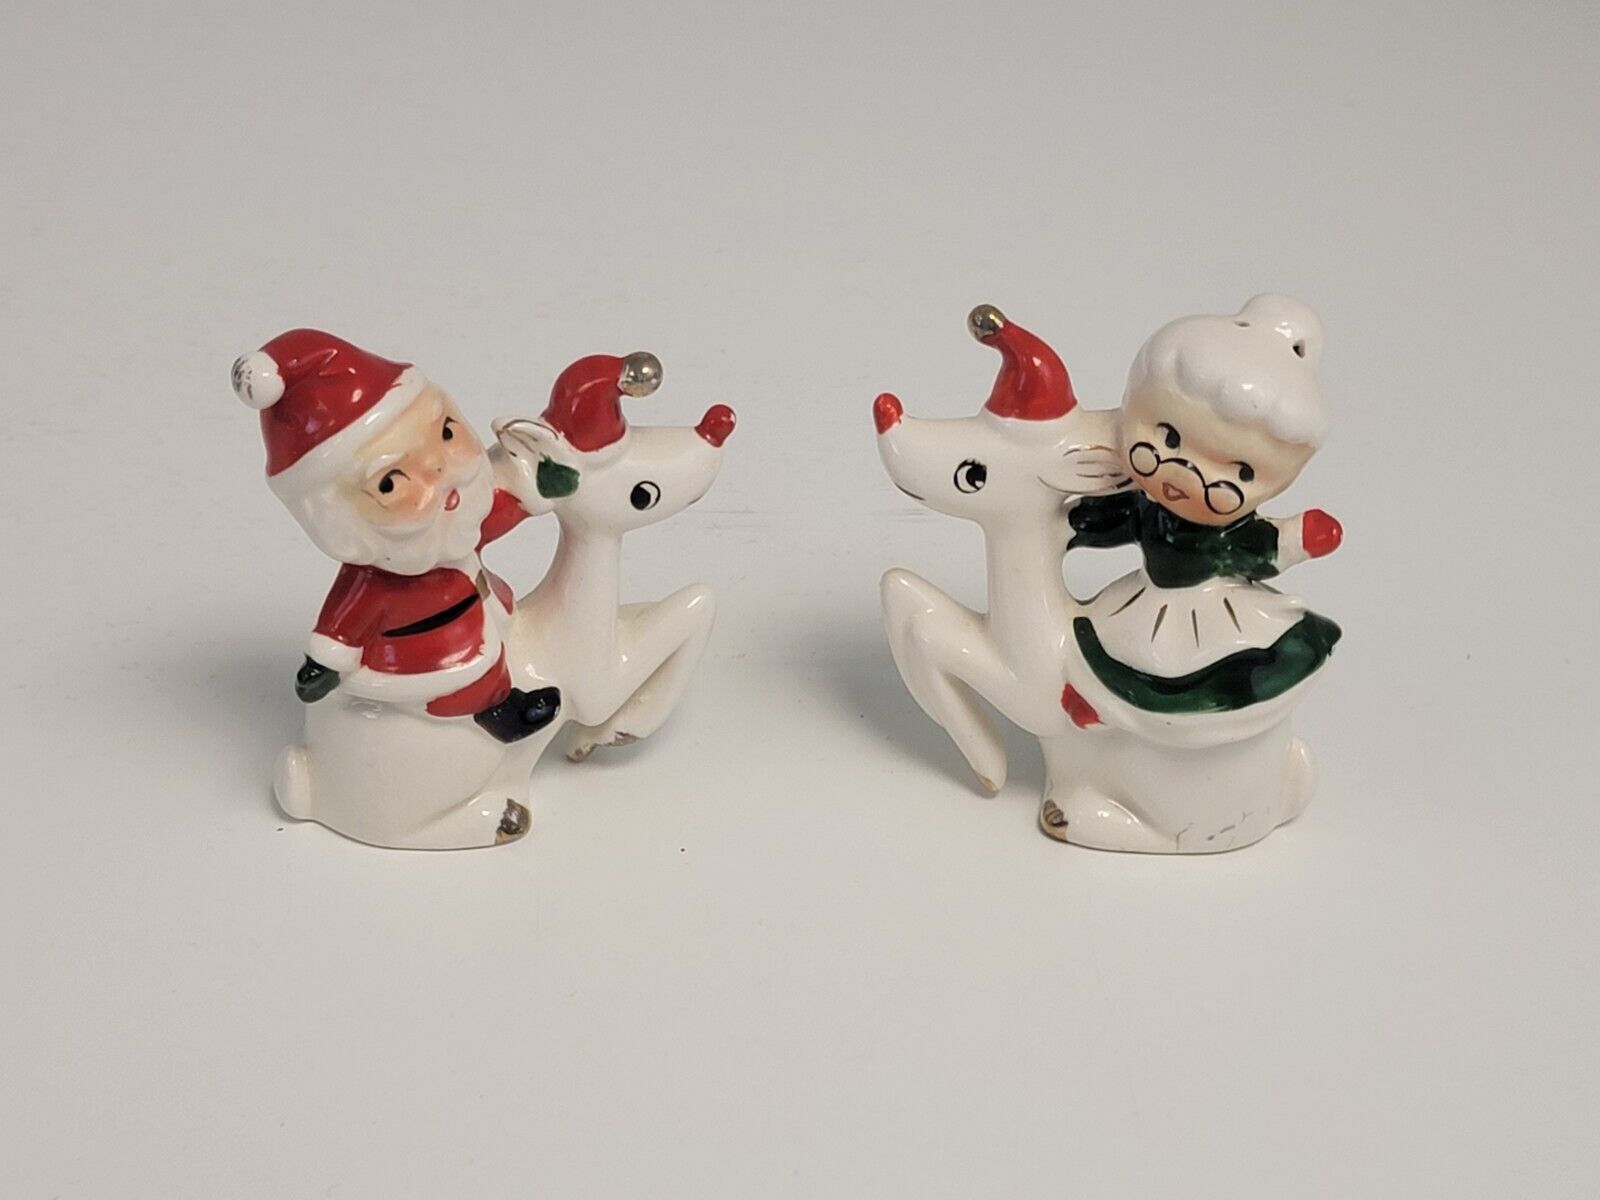 Vintage Christmas Salt and Pepper Shakers Santa and Mrs. Clause Riding Reindeer